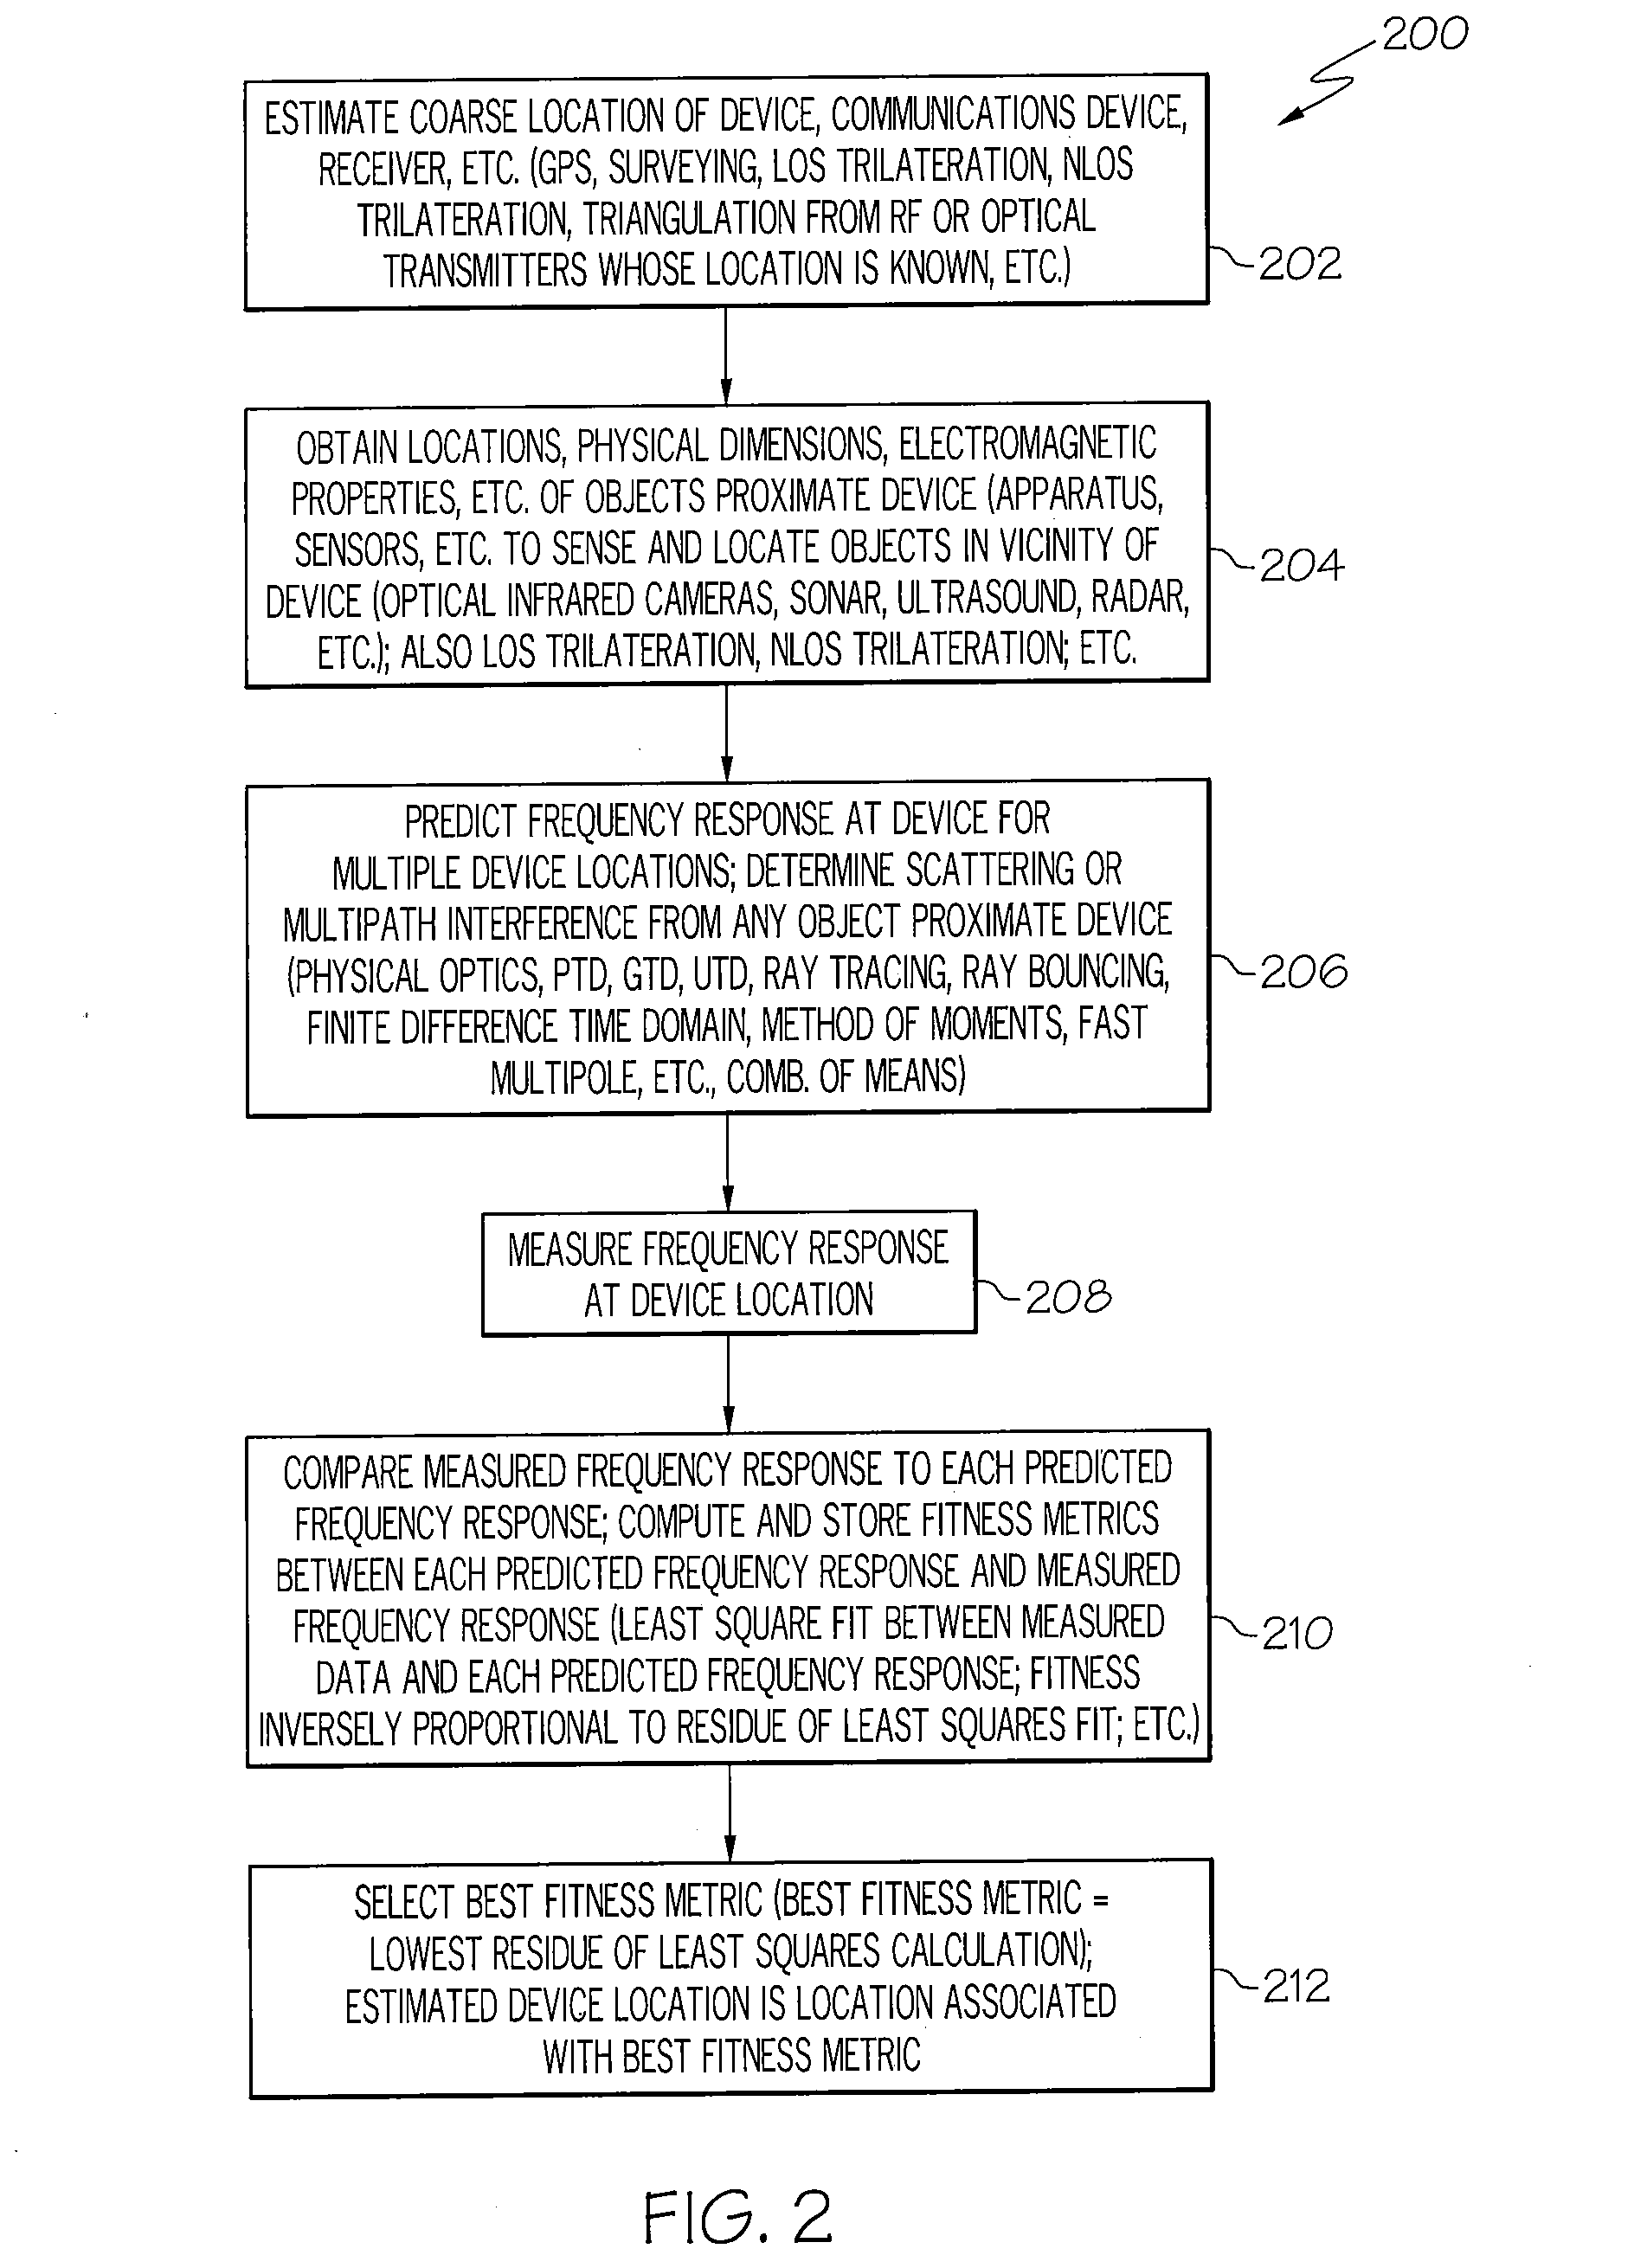 Radio frequency navigation using frequency response matching